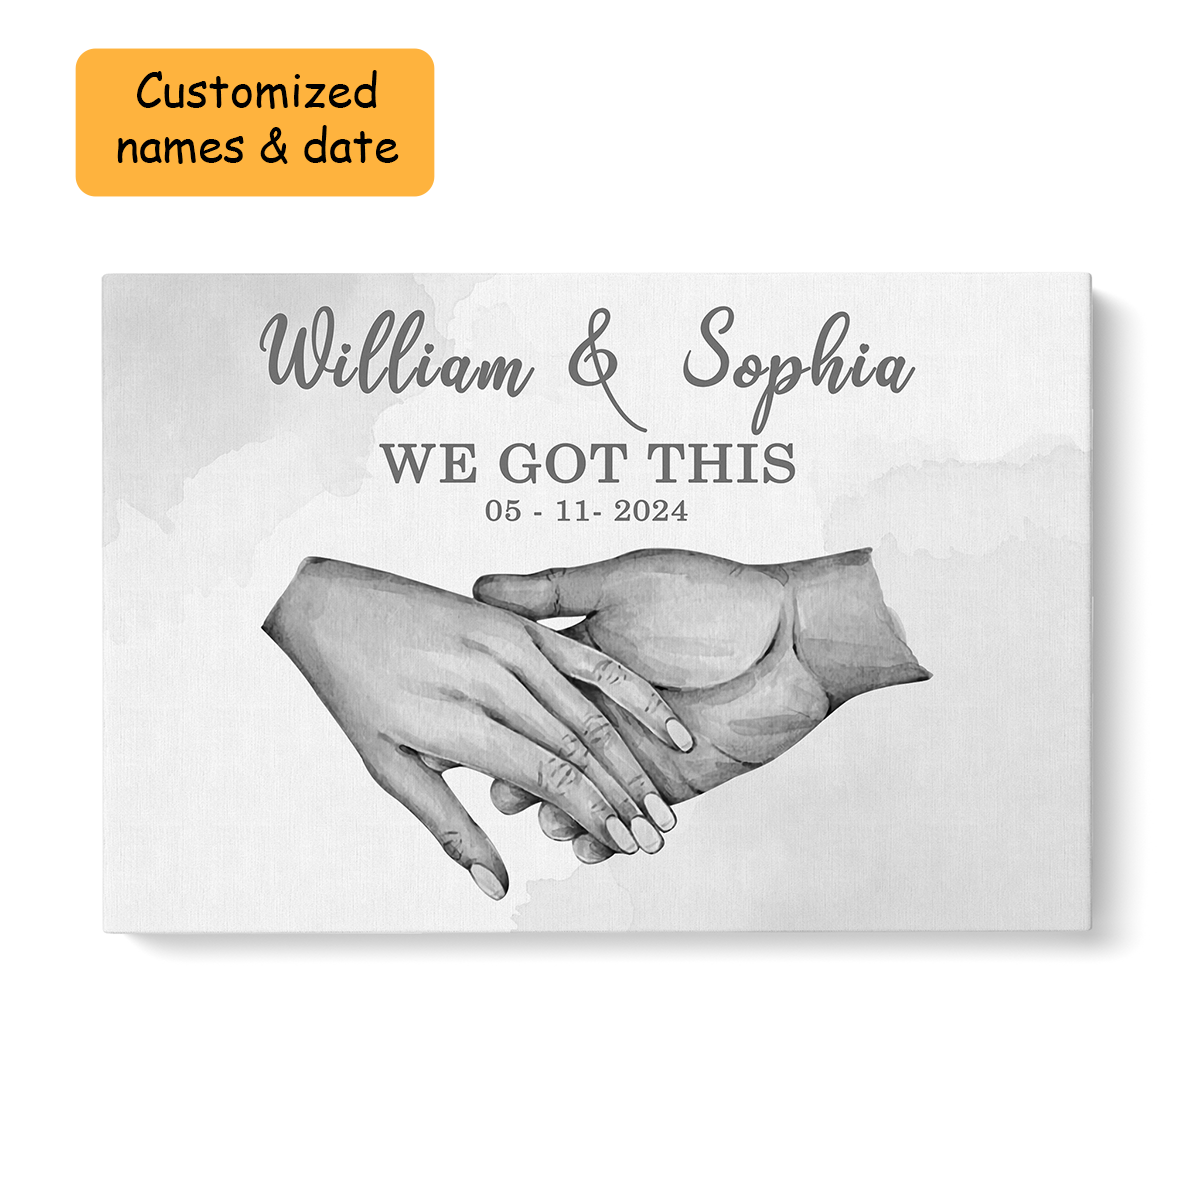 Personalized Couples Wedding Anniversary Wall Art Canvas, Holding Hands We Got This Couple Black And White Canvas Decor